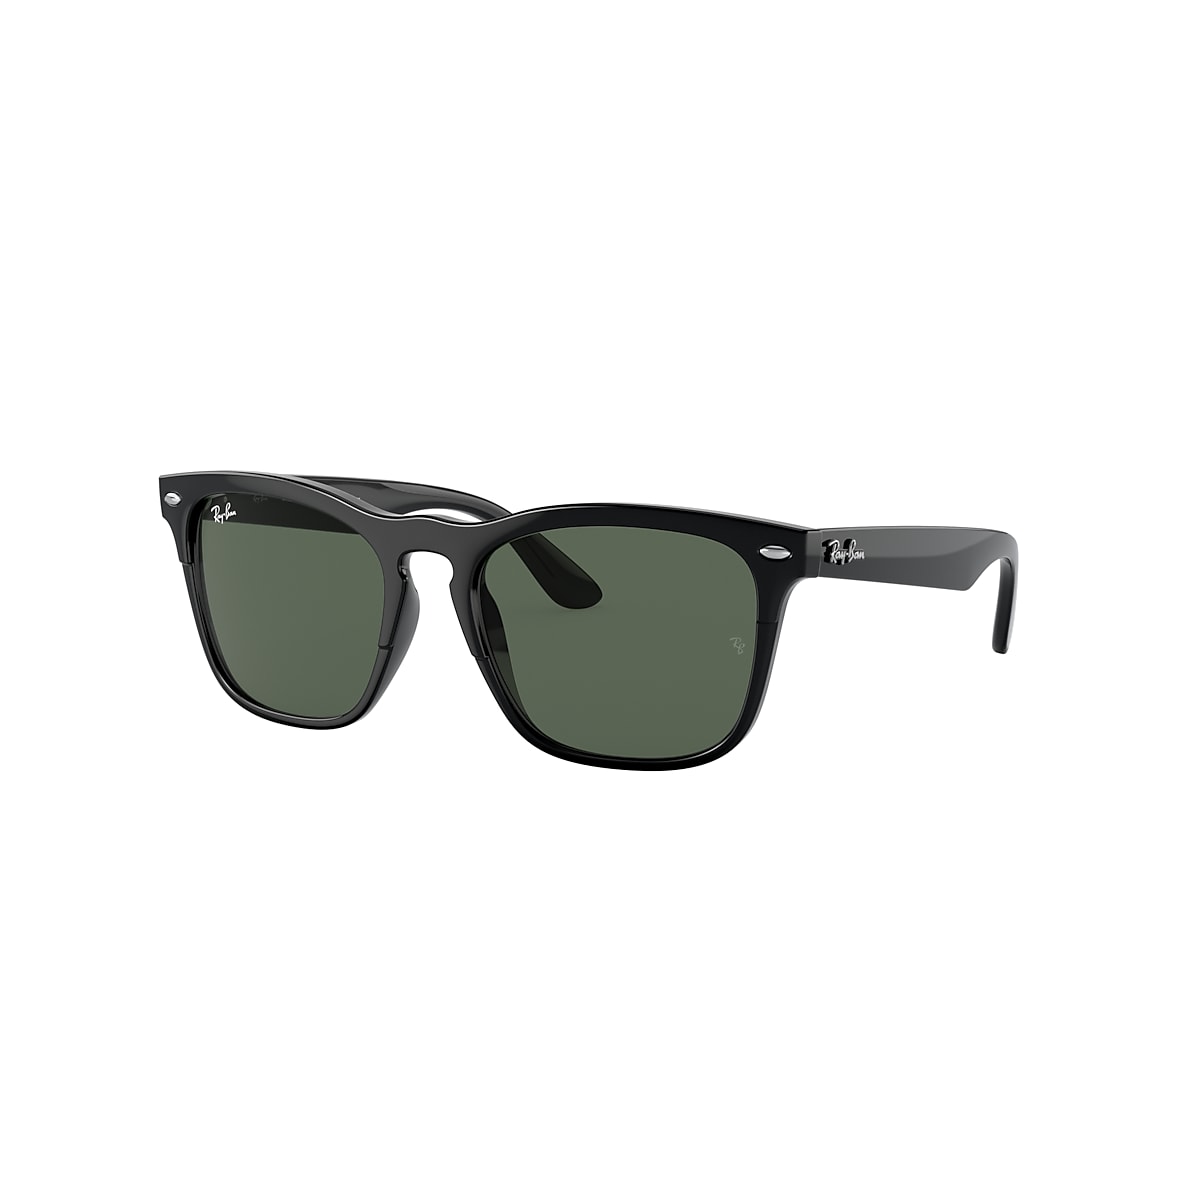 STEVE Sunglasses in Black and Dark Green - RB4487F | Ray-Ban® US